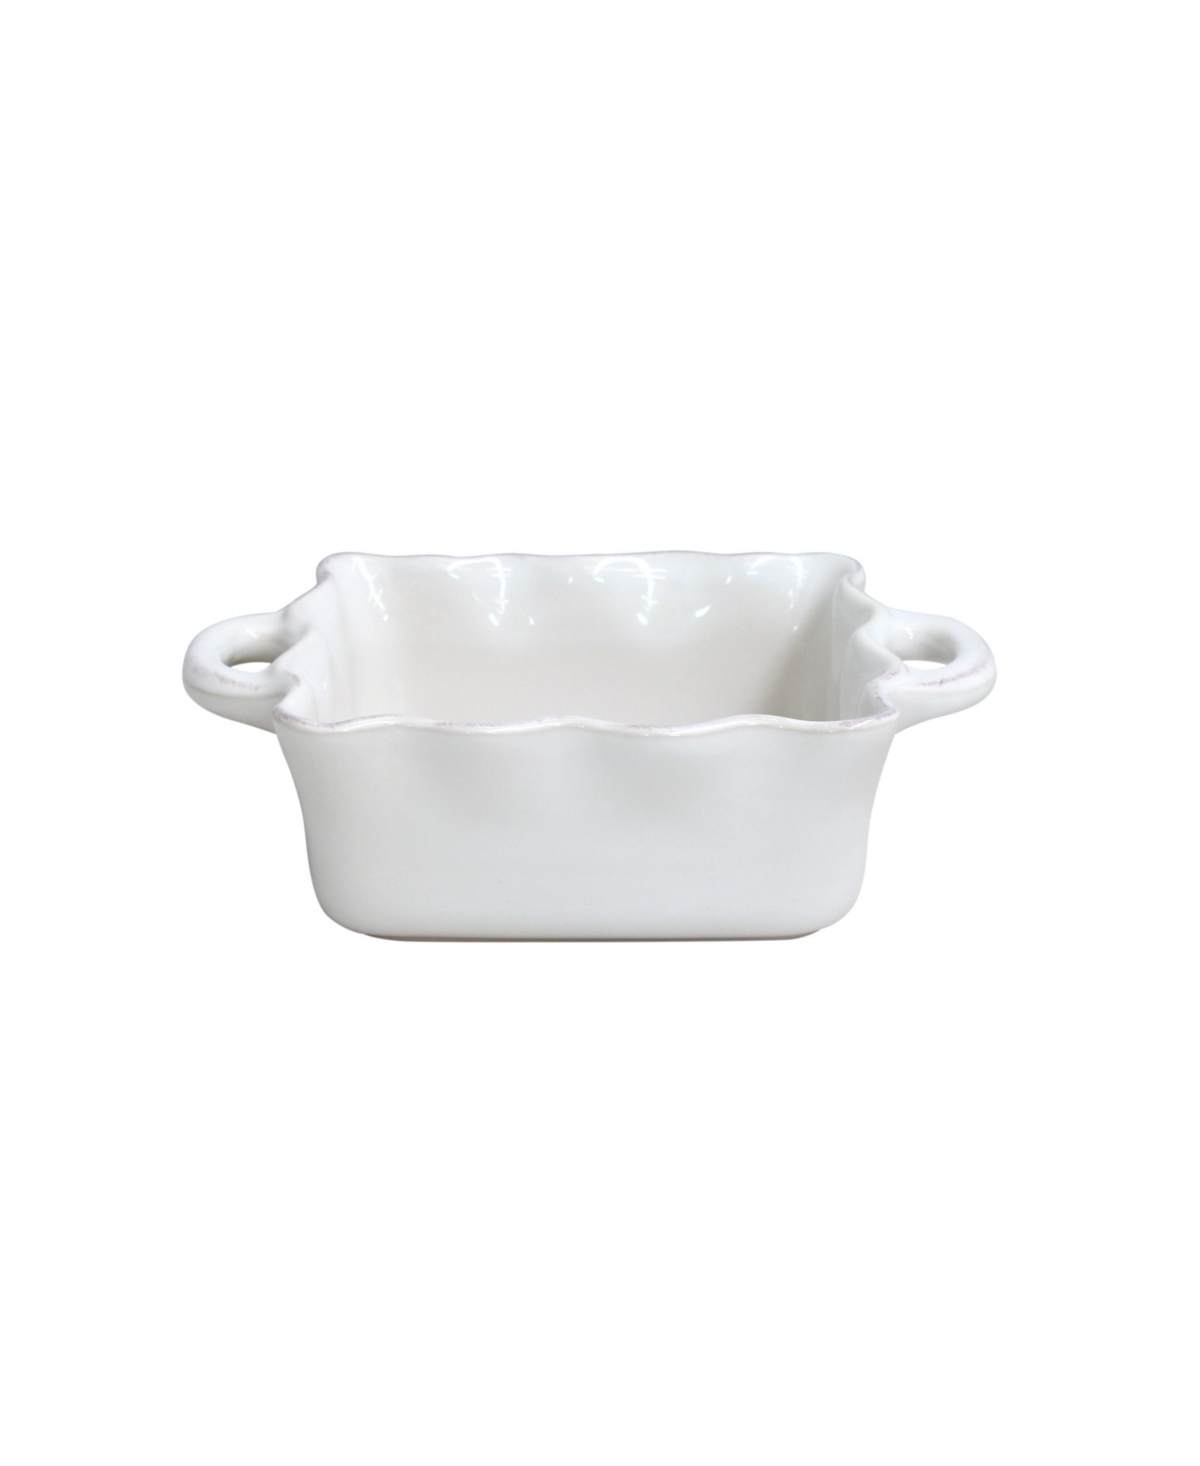 Casafina Stoneware White Square Ruffle Baker With Handles